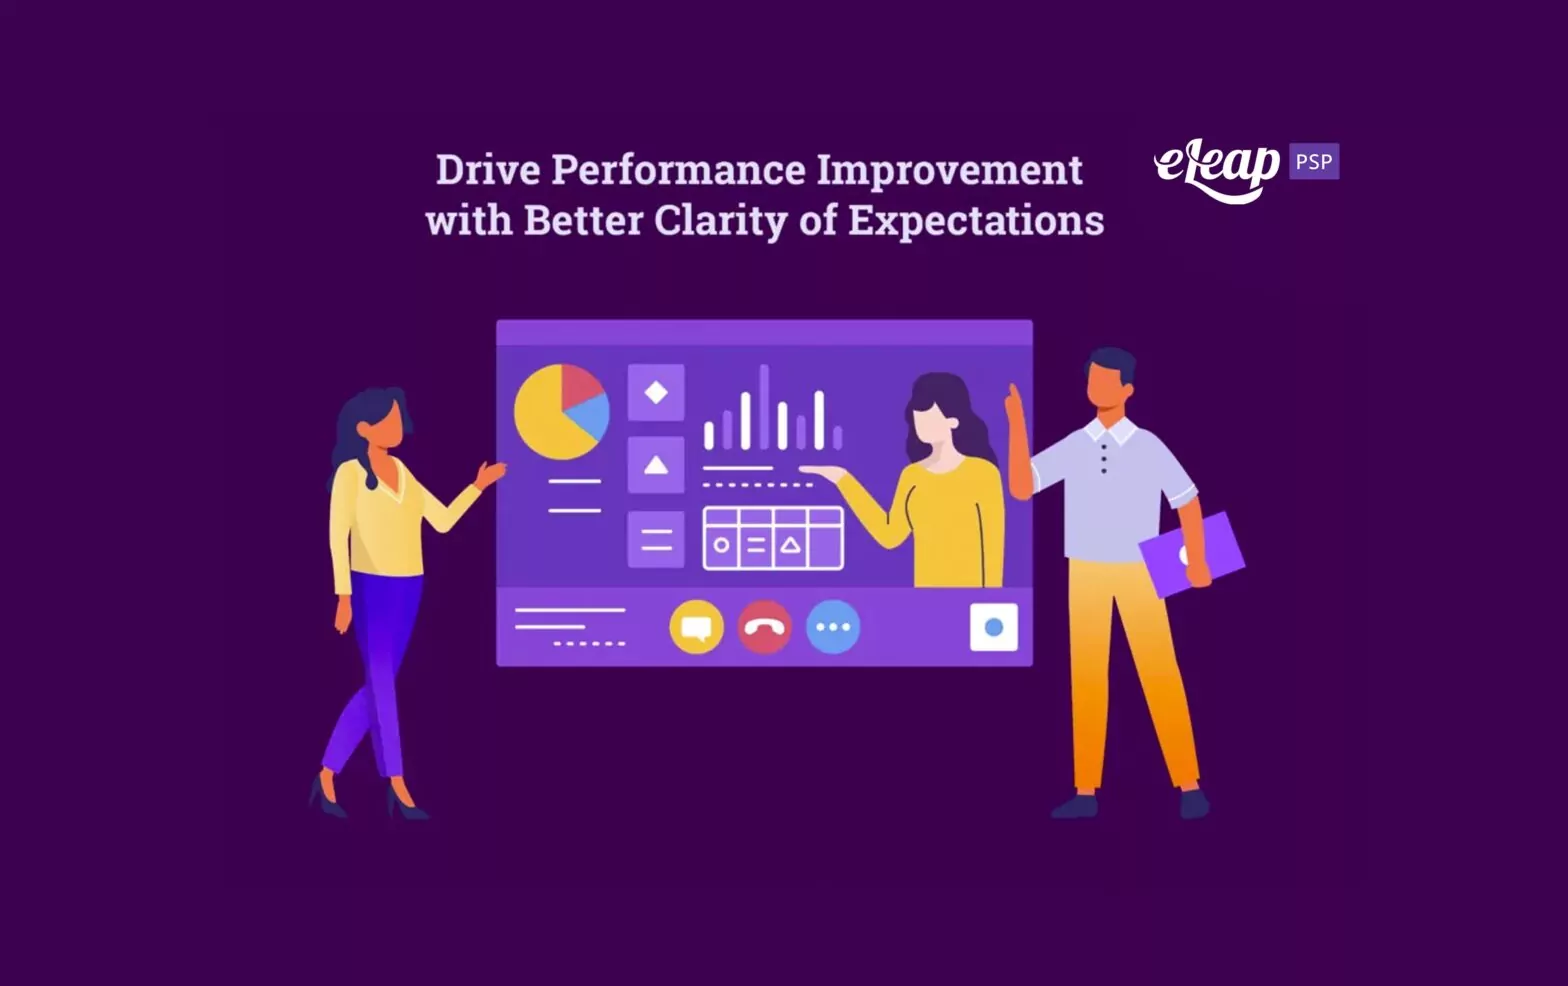 Drive Performance Improvement with Better Clarity of Expectations